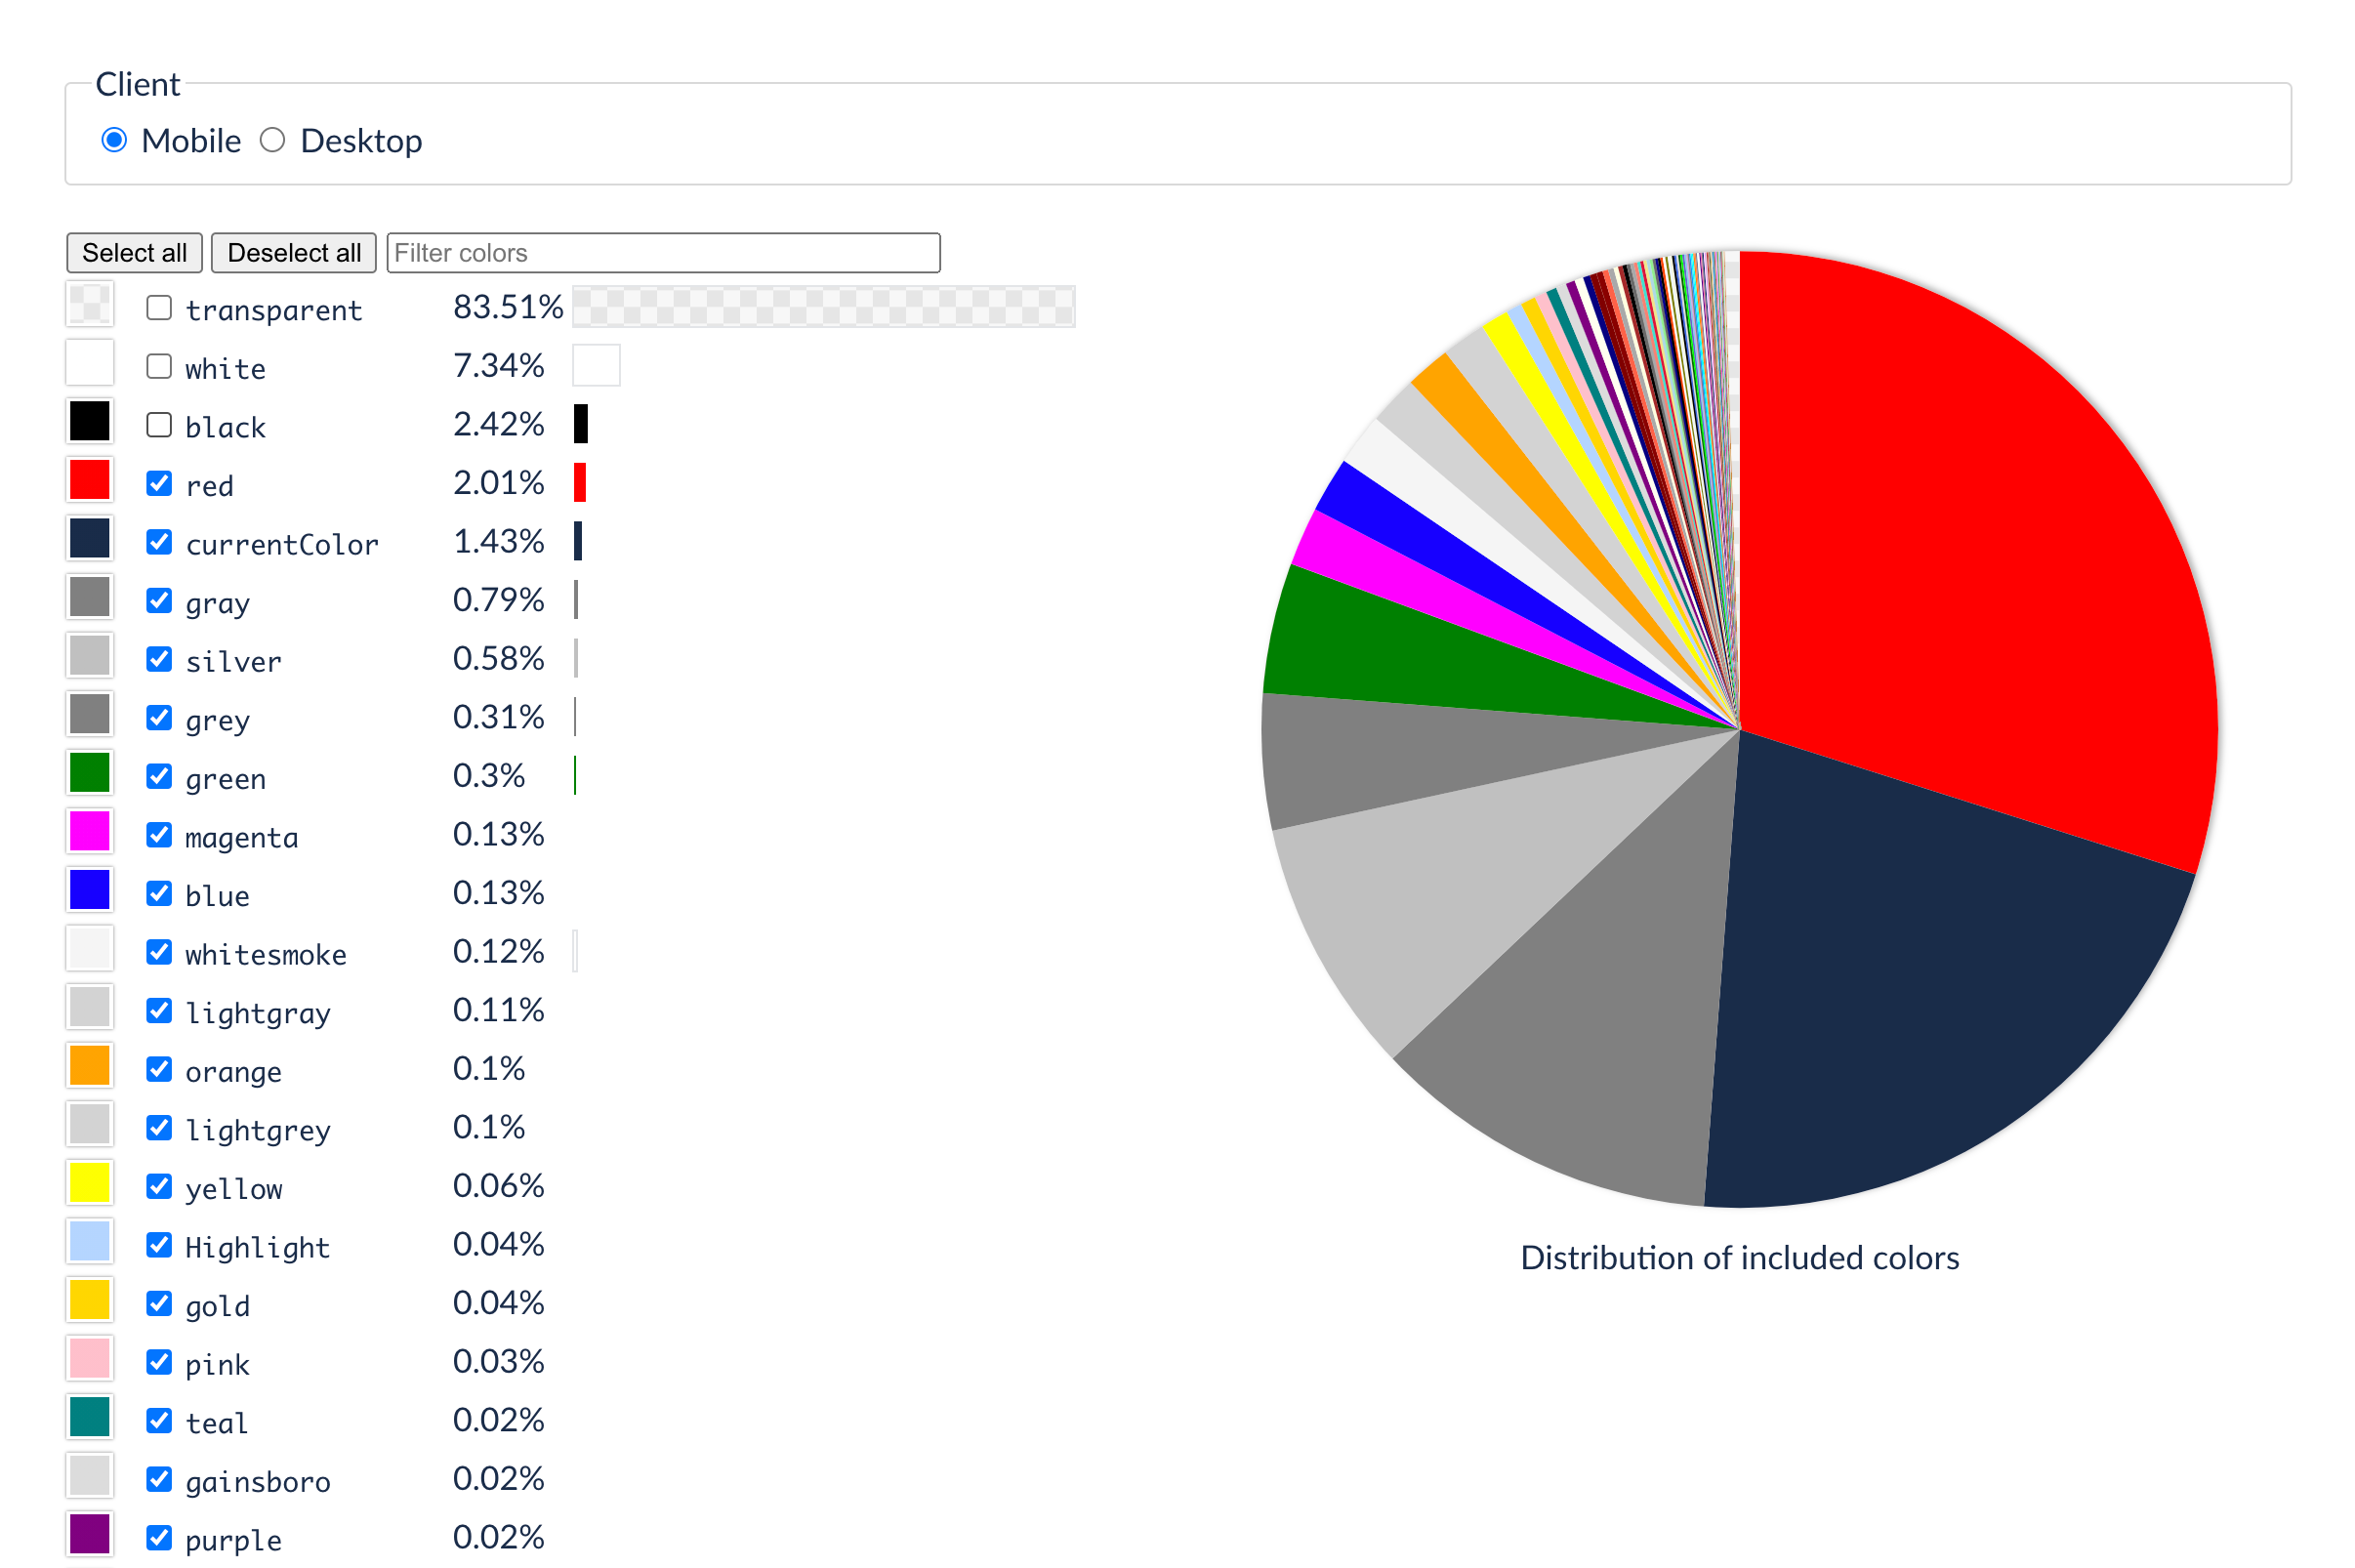 Interactively explore the color keyword usage data with this interactive app!